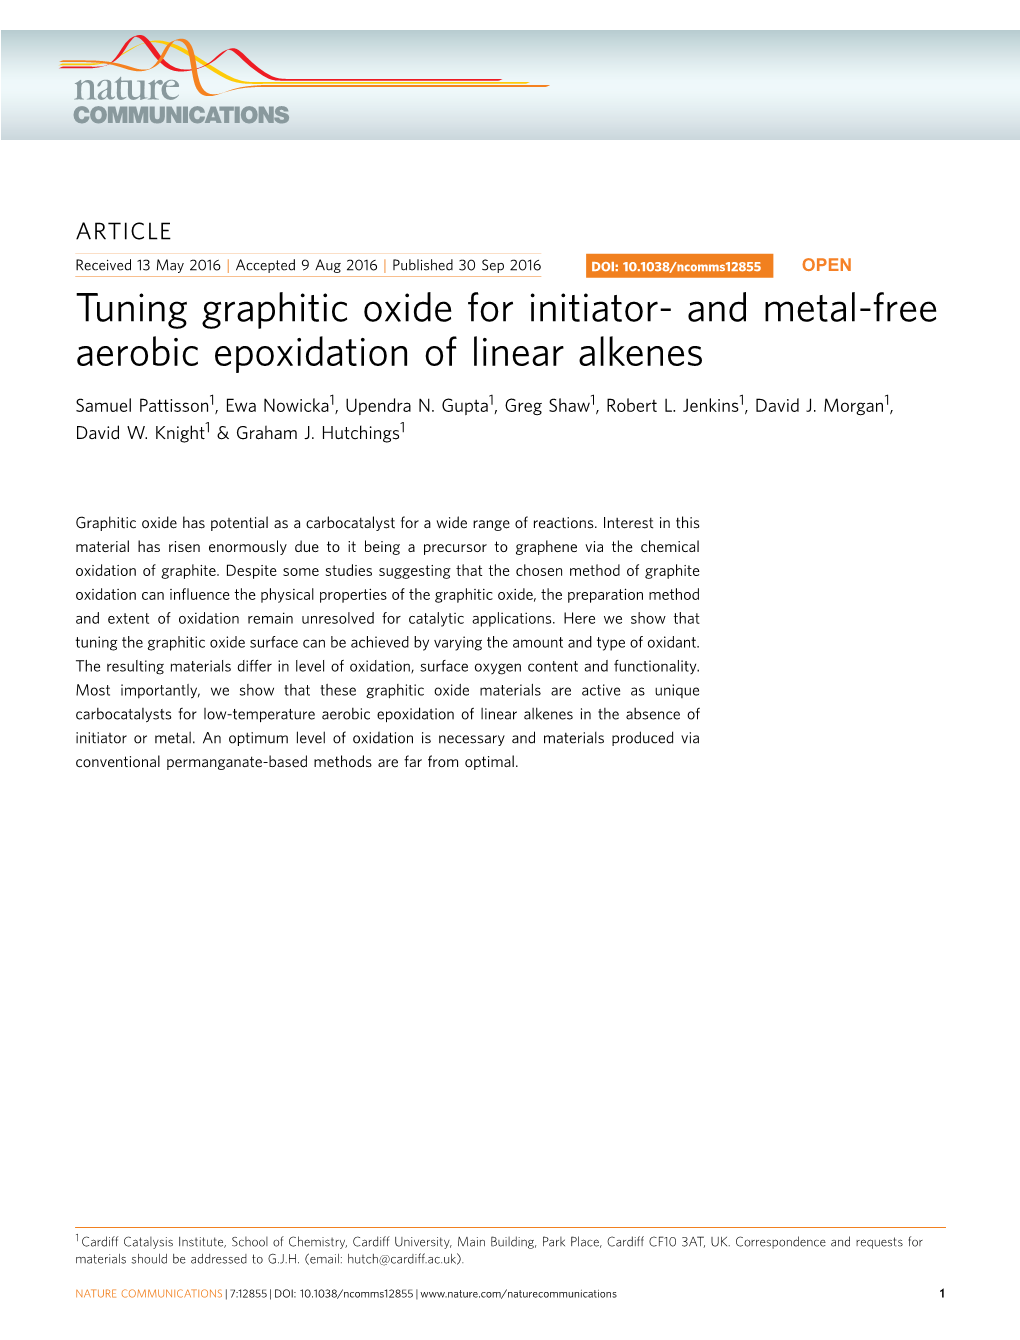 Tuning Graphitic Oxide for Initiator- and Metal-Free Aerobic Epoxidation of Linear Alkenes